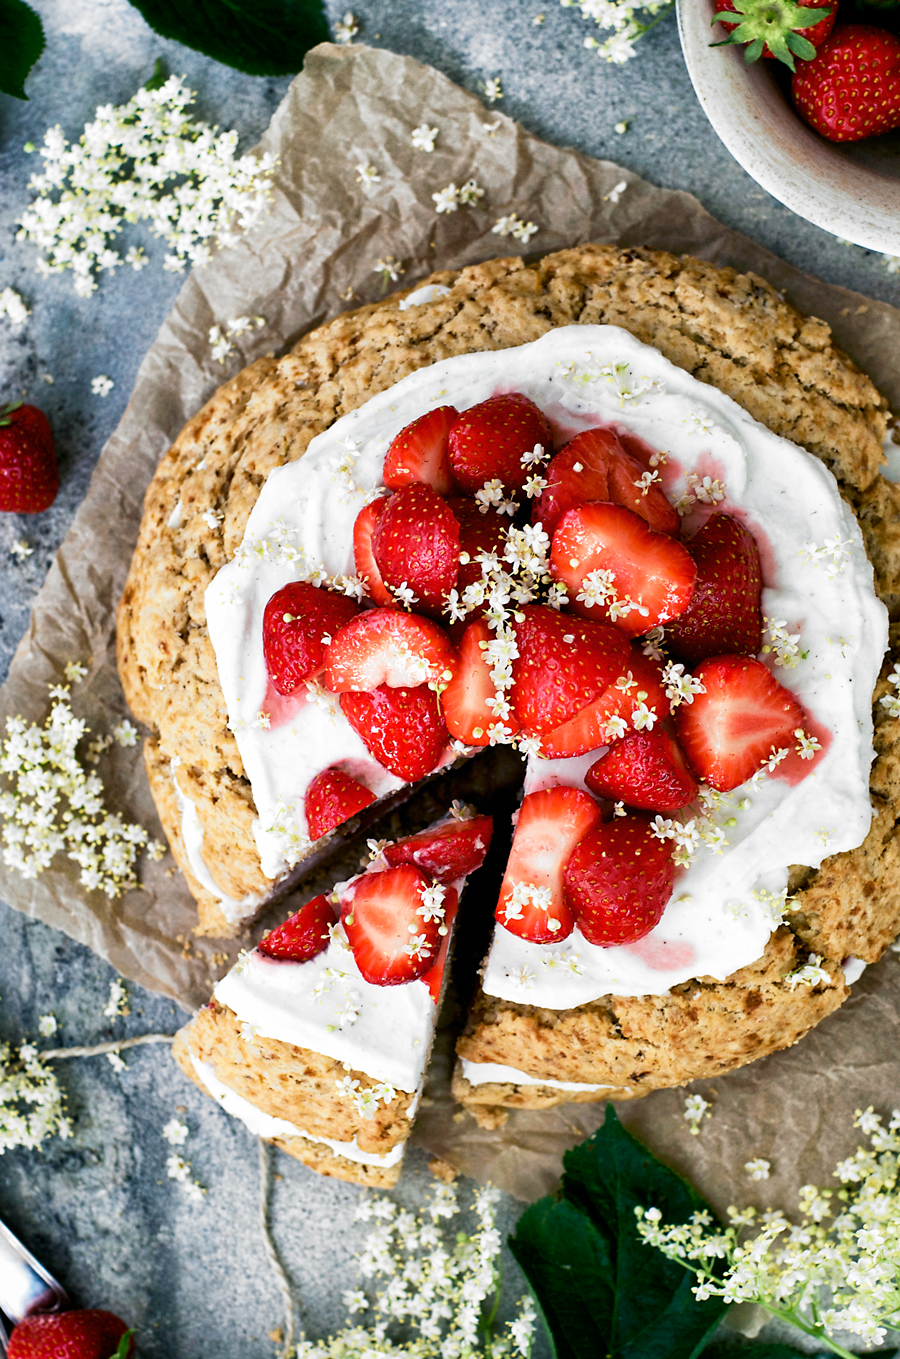 Giant scone cake layered with coconut whipped cream and strawberries, surrounded by elderflower, strawberries, and with a blue background, one slice cut